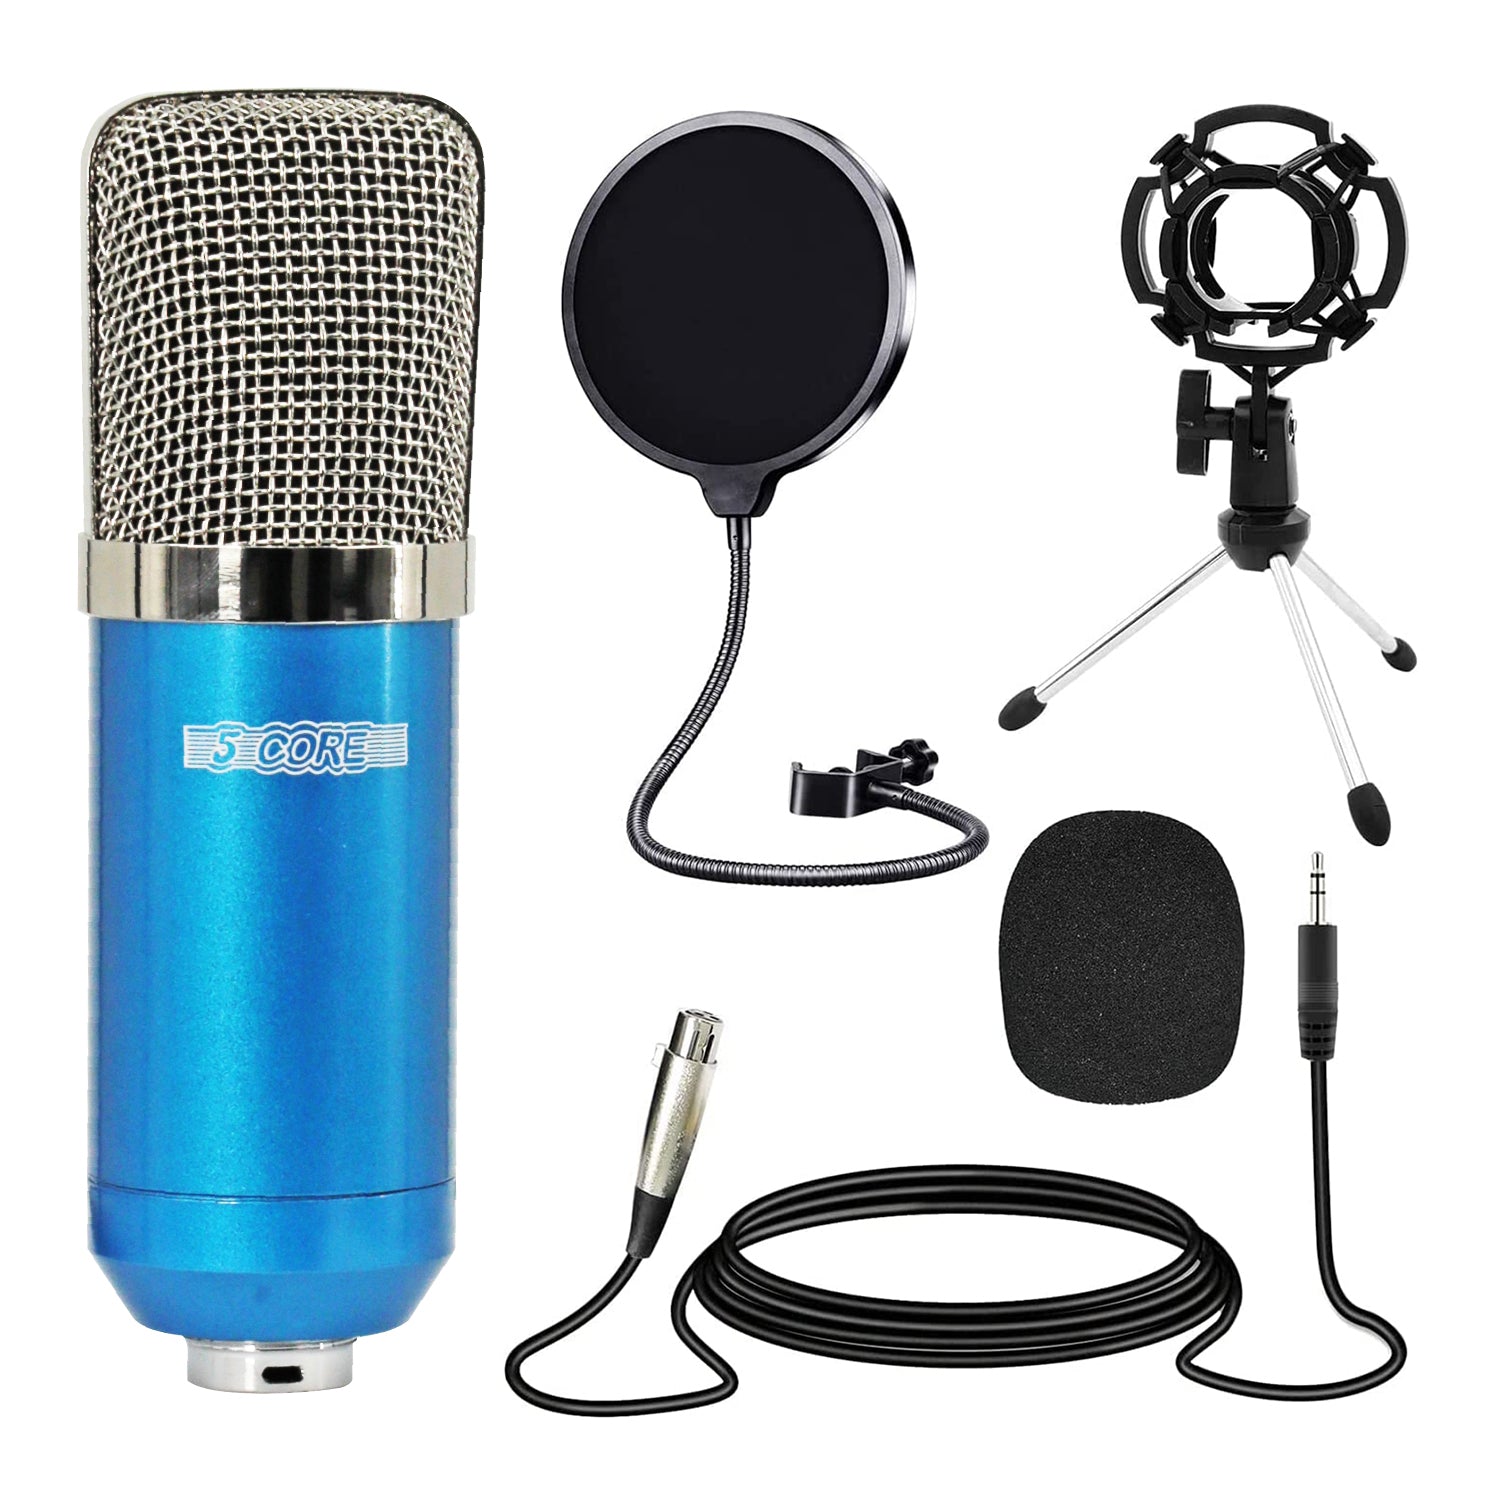 5Core Recording Microphone Podcast Bundle  Professional Condenser Cardioid Mic Kit  w Desk Stand